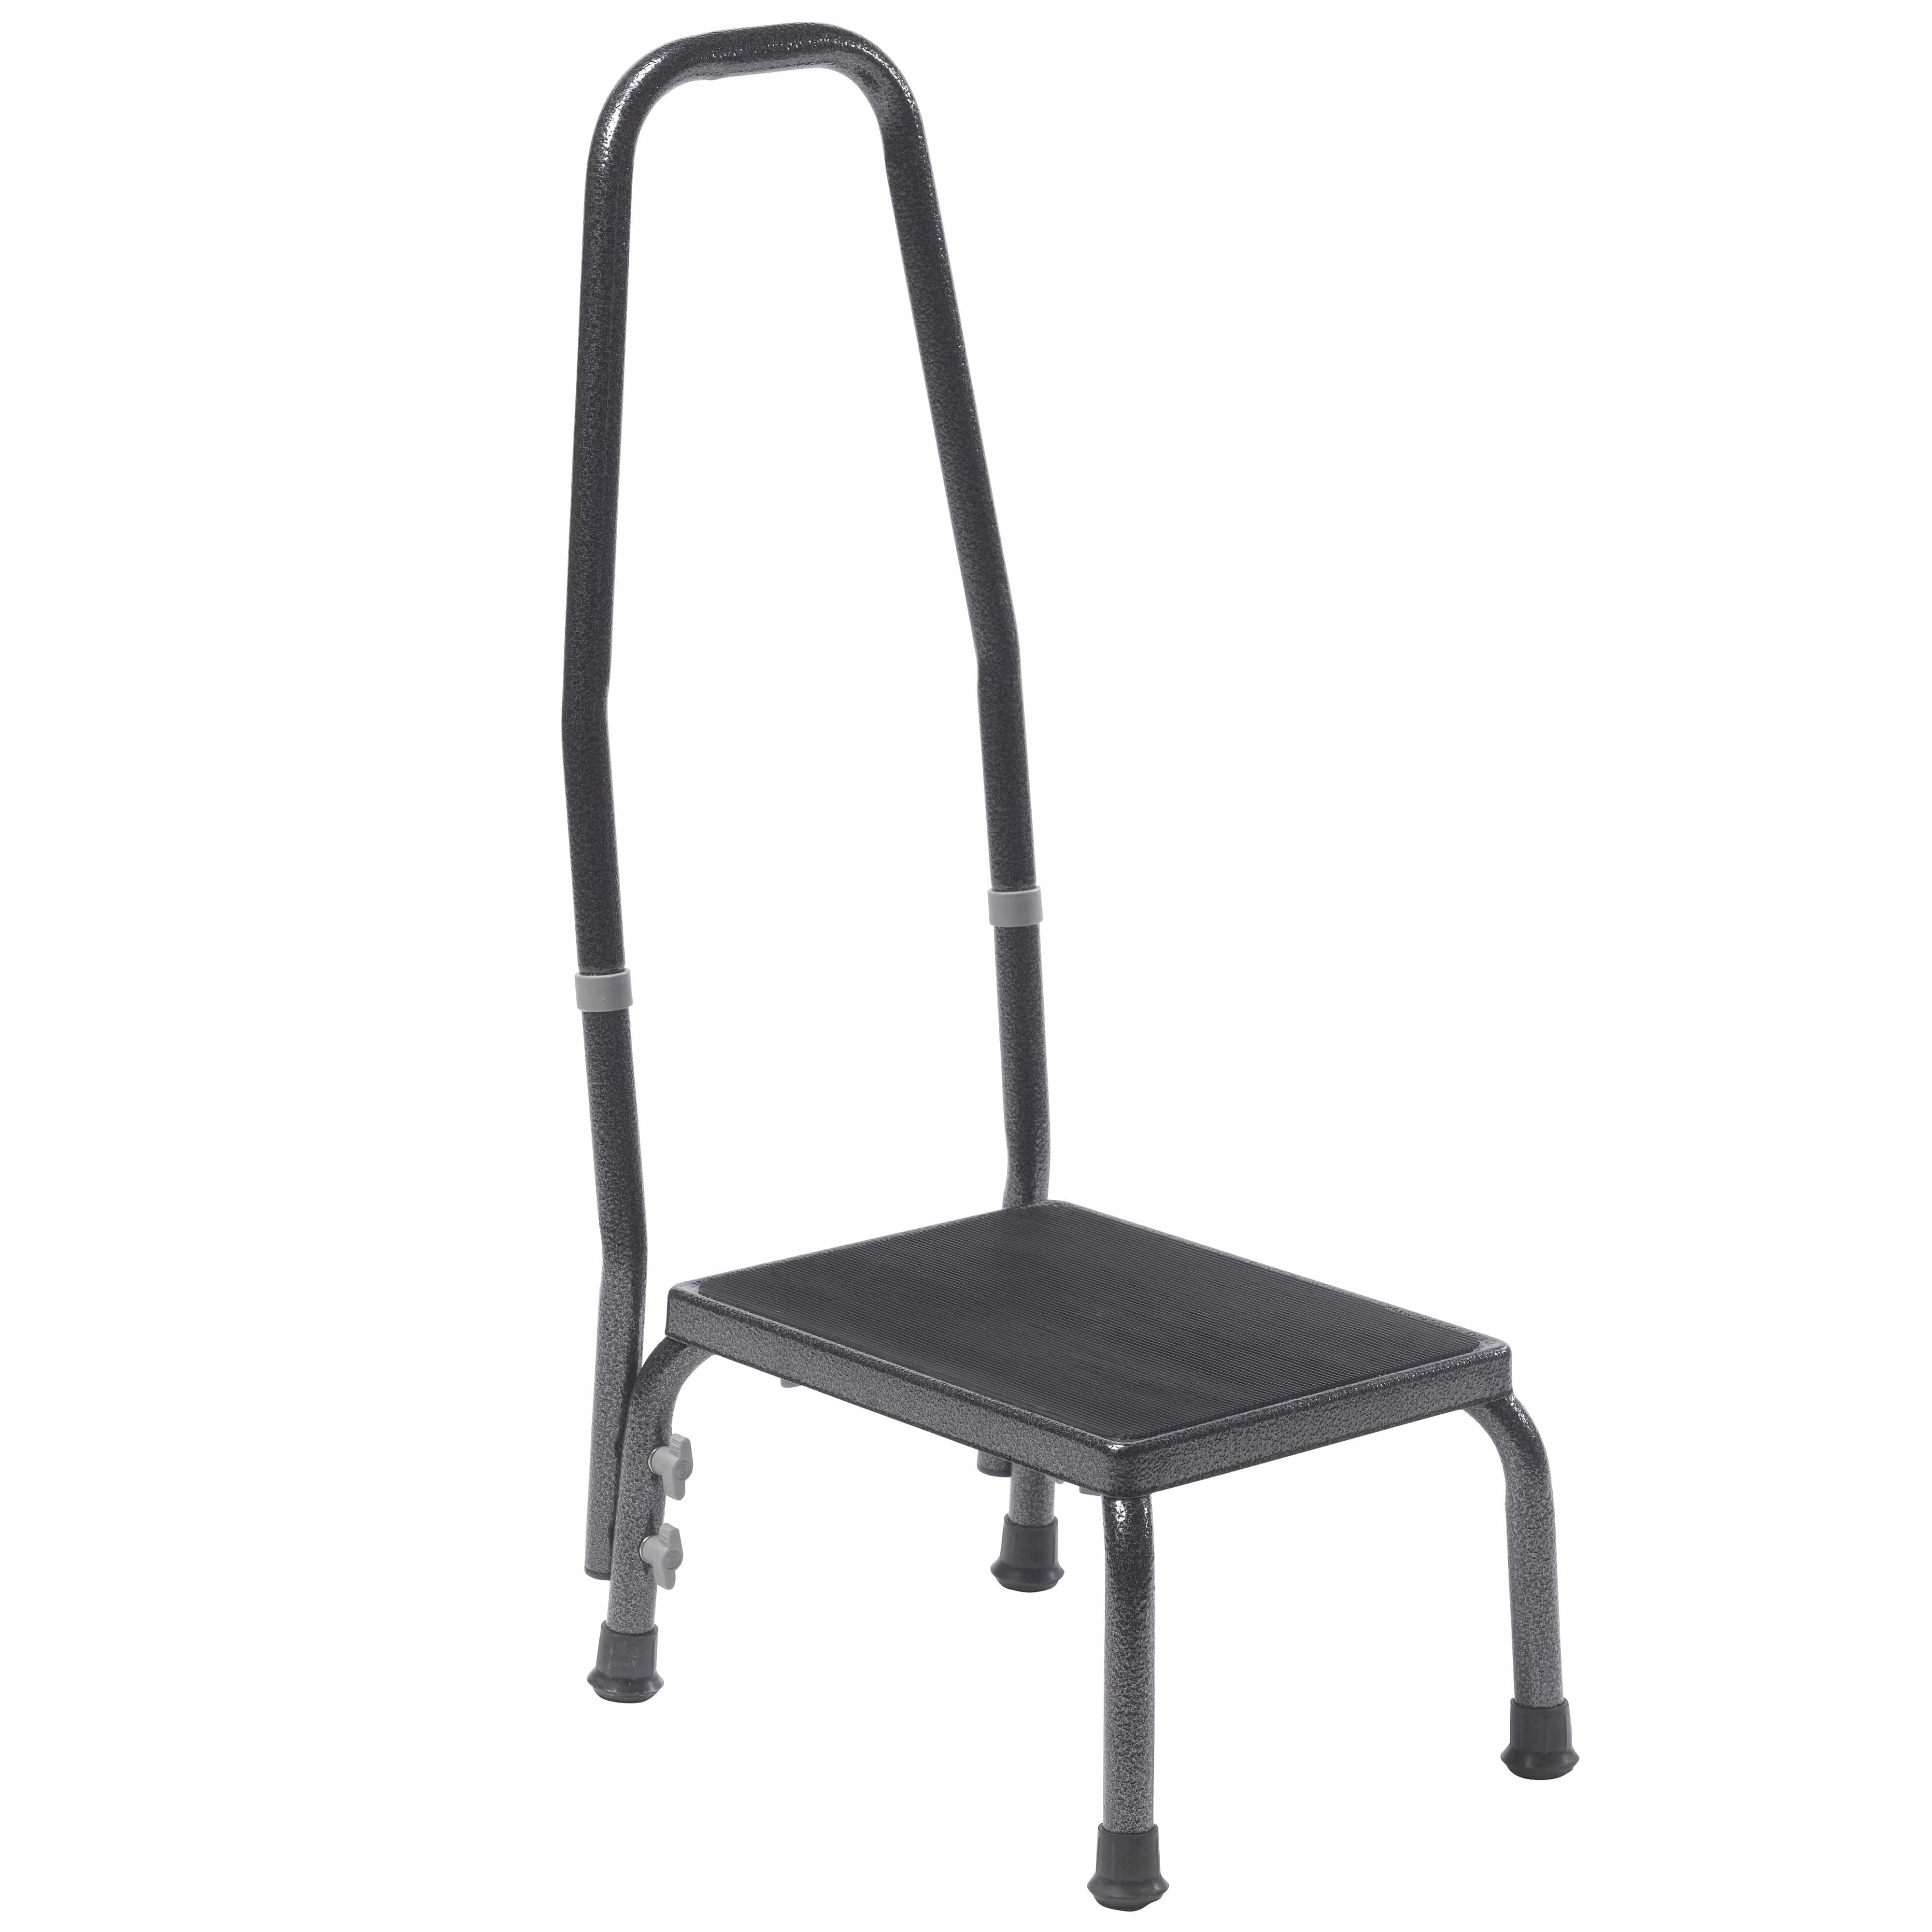 Drive Medical Drive Medical Footstool with Non Skid Rubber Platform 13031-1sv